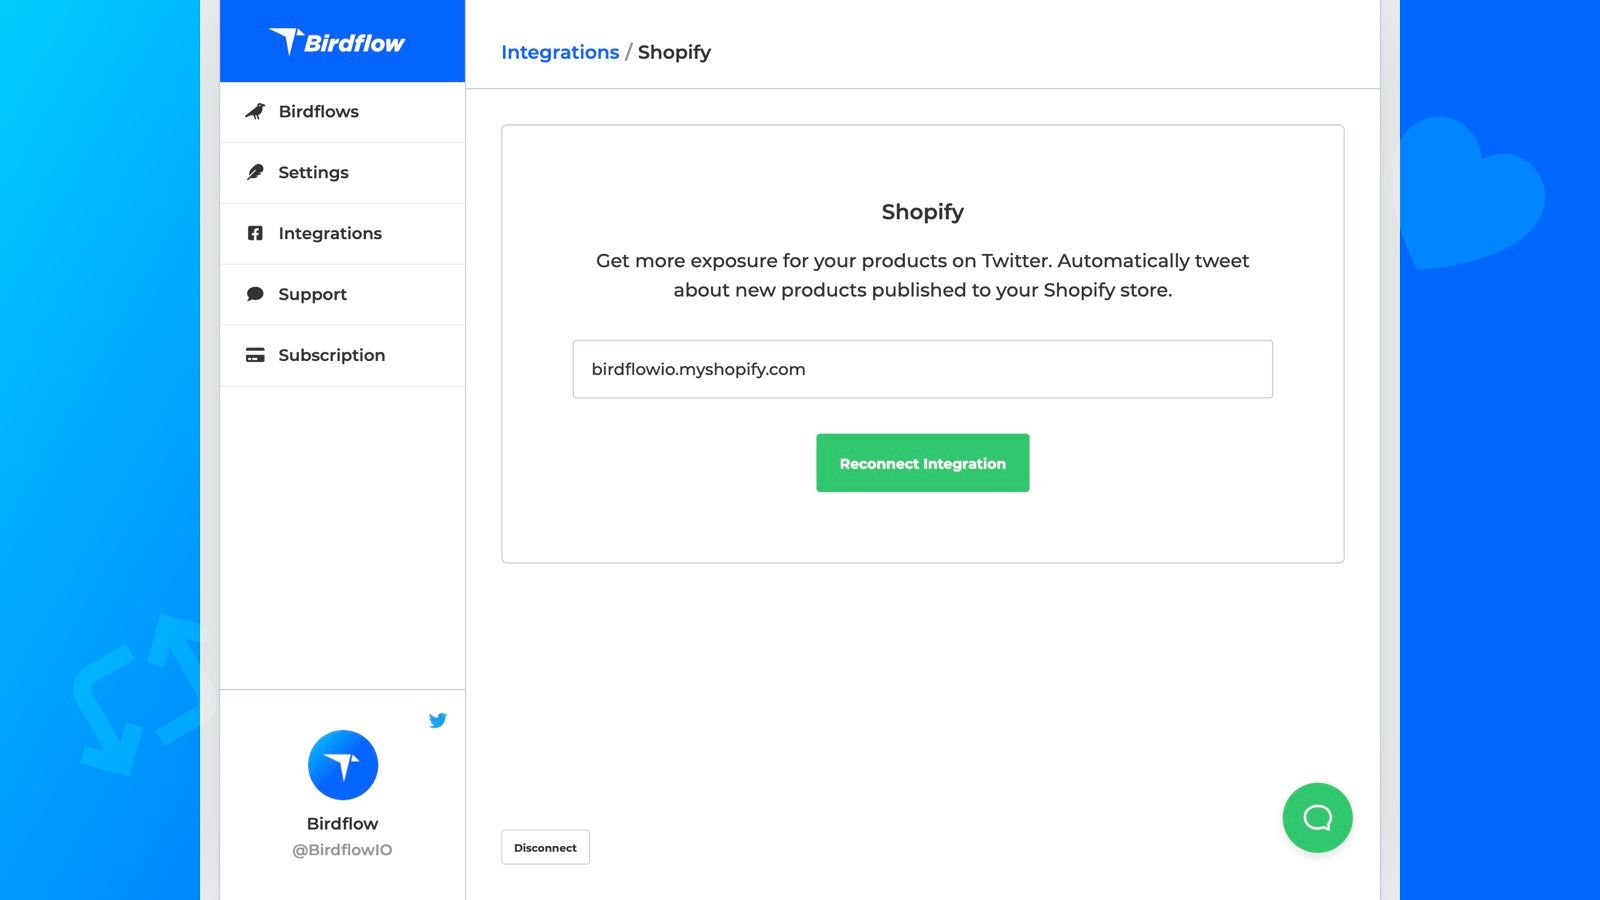 Easily connect your Shopify store.